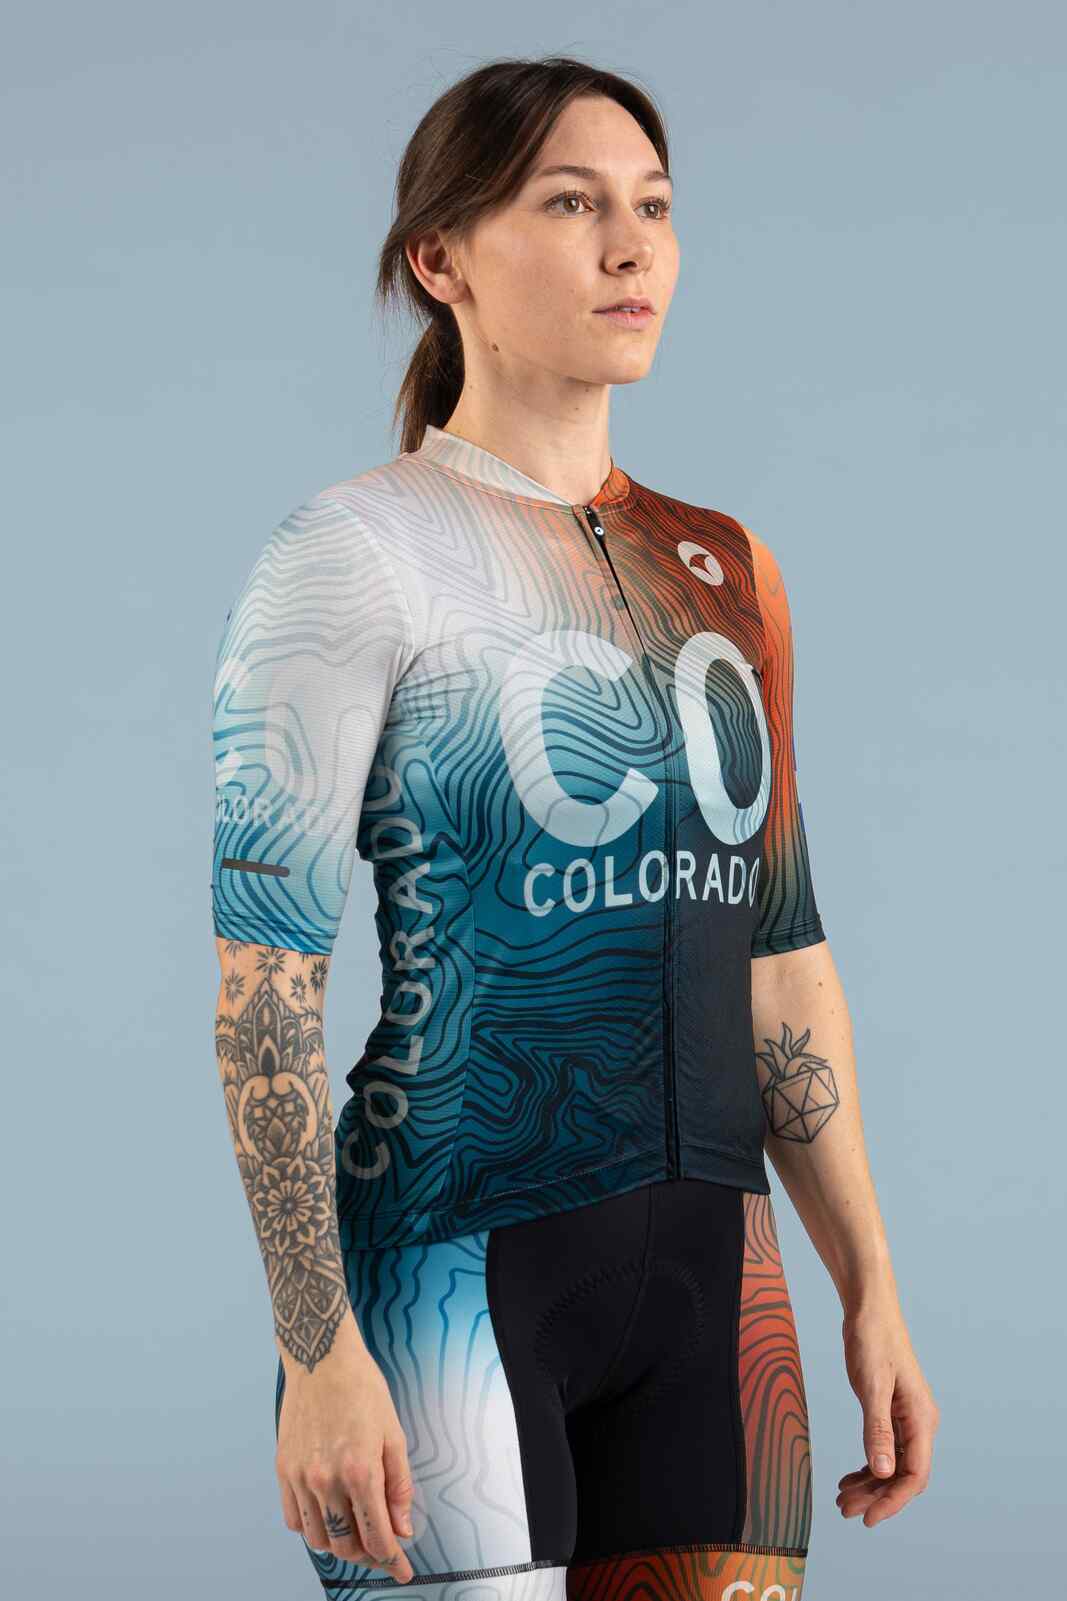 Women's Colorado Geo Cycling Jersey - Ascent Aero Front View